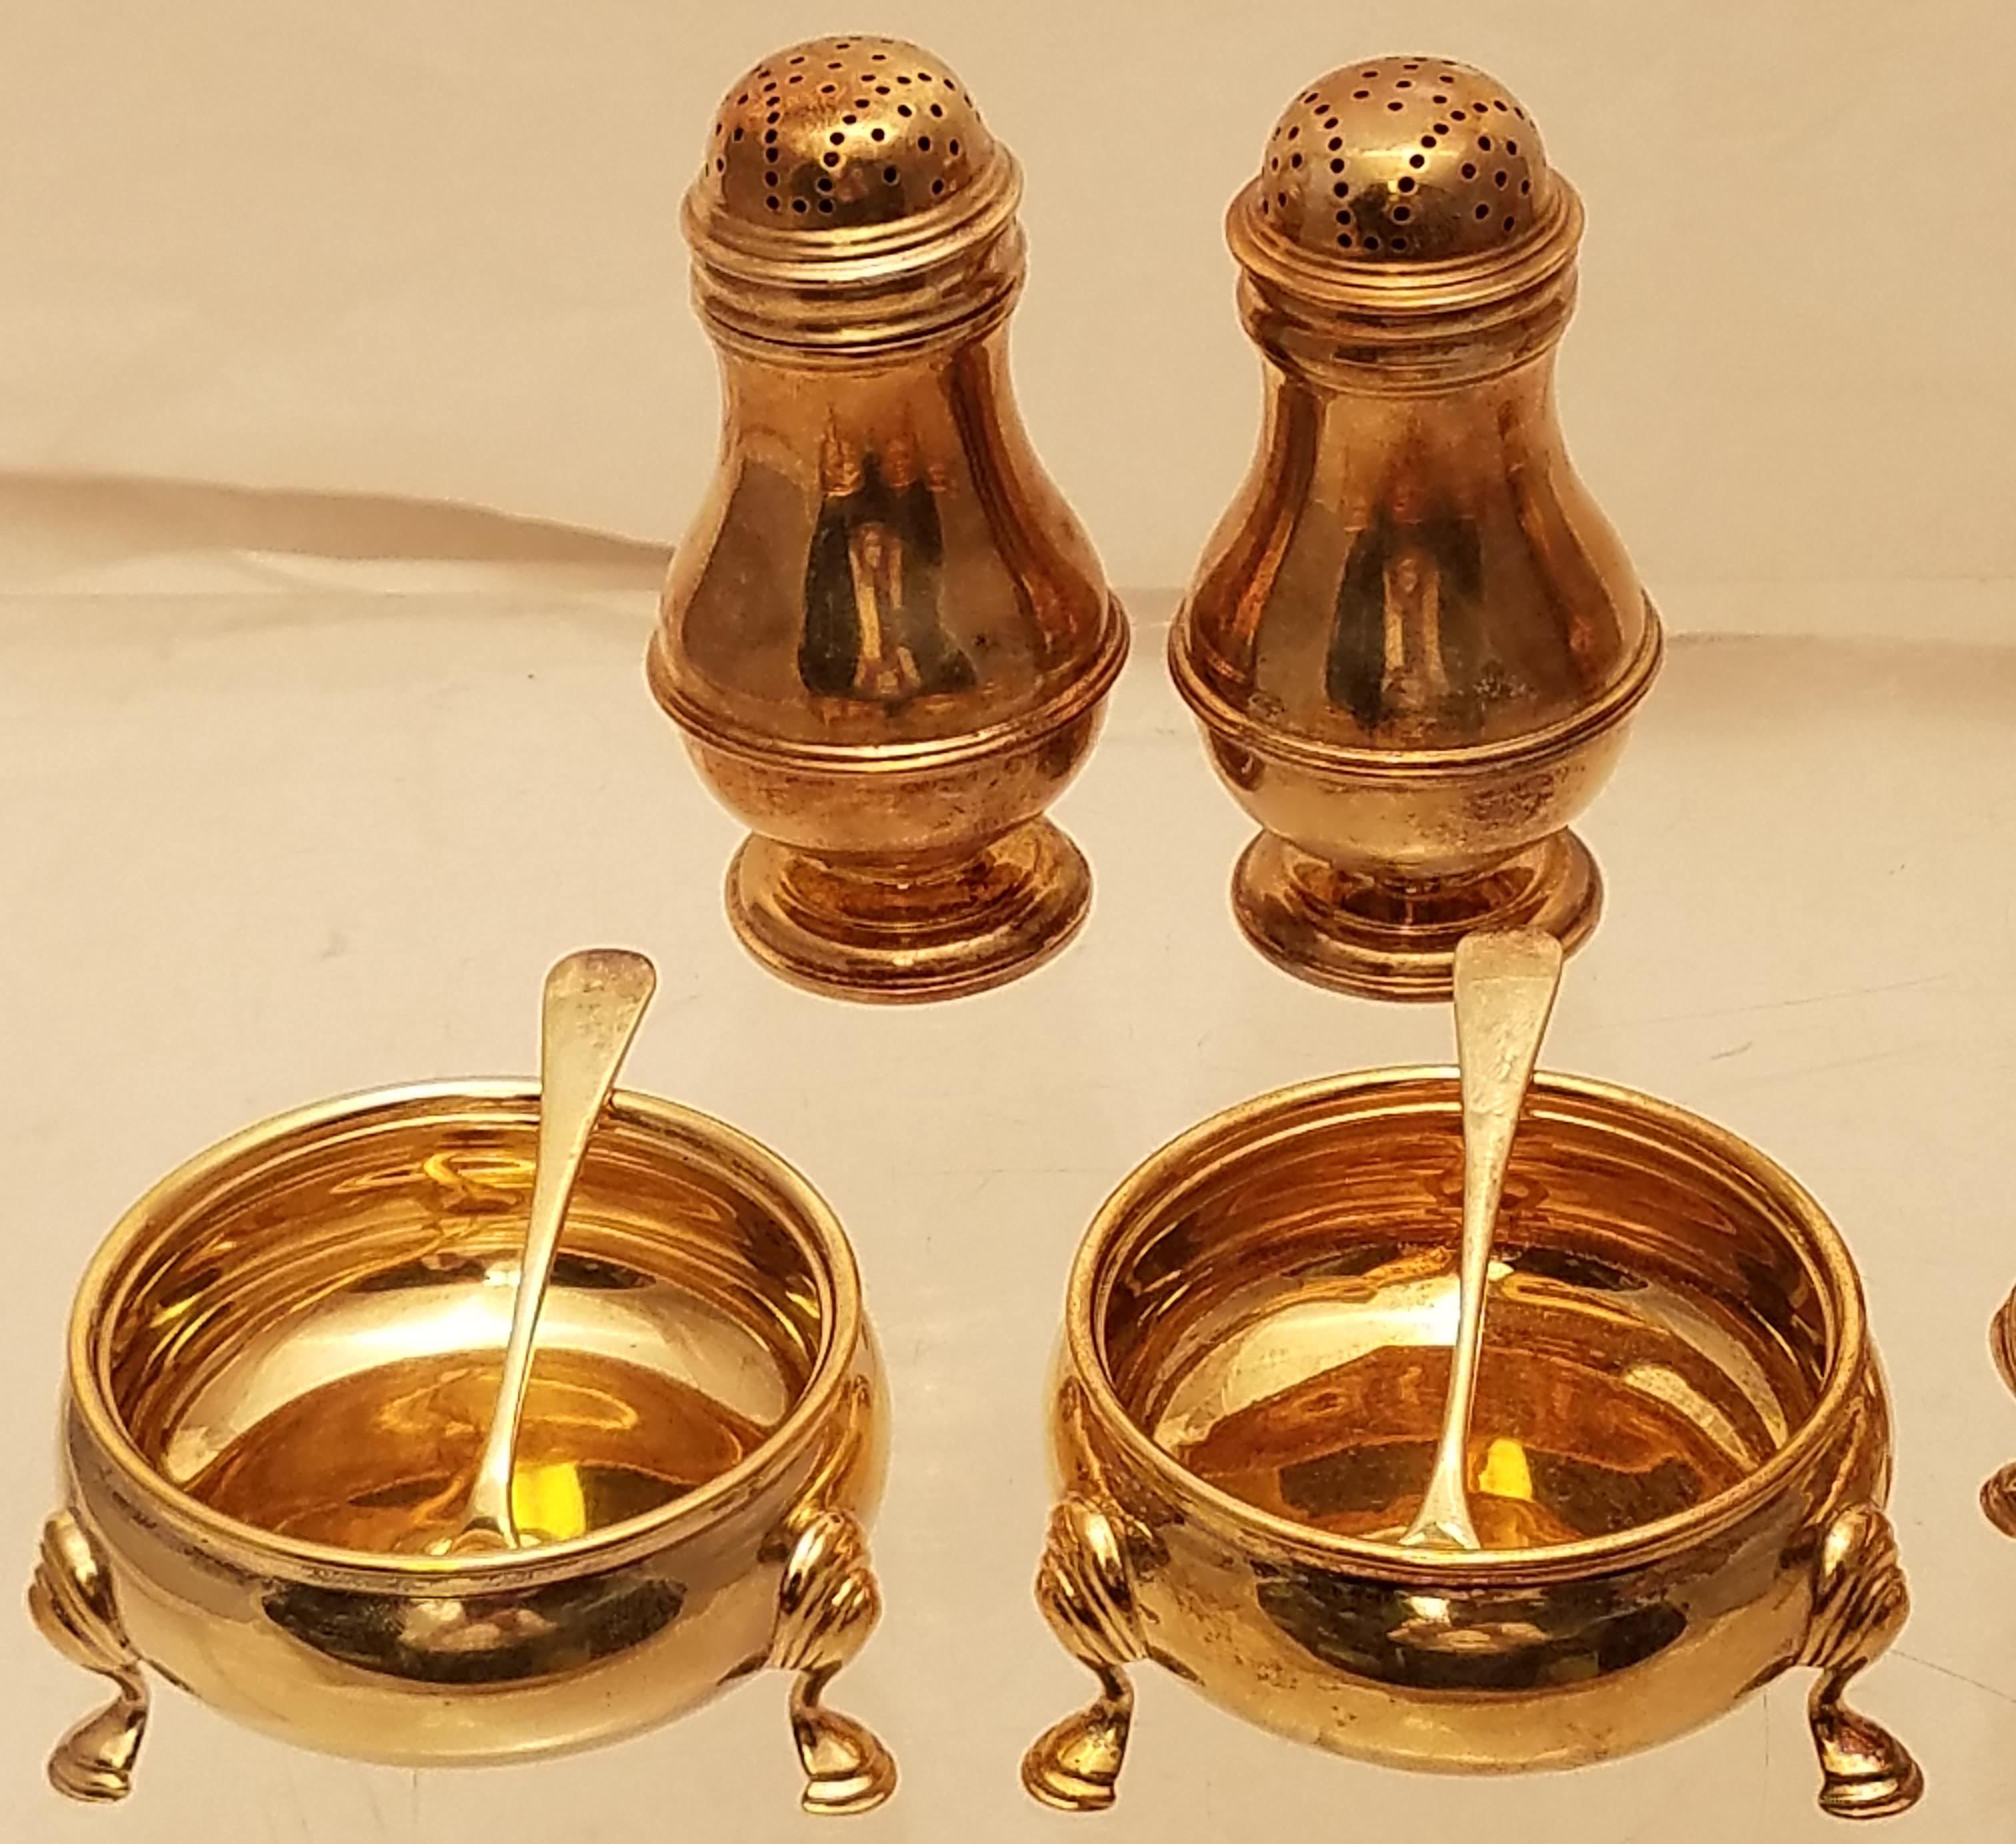 Fine gilt English silver set of 4 salt and pepper condiments. It consists of 4 salt and pepper shakers, 4 open footed salt dishes, and 2 salt spoons. It is made by Richard Comyns, a London-based silversmith, and dates from 1927, and is in Georgian